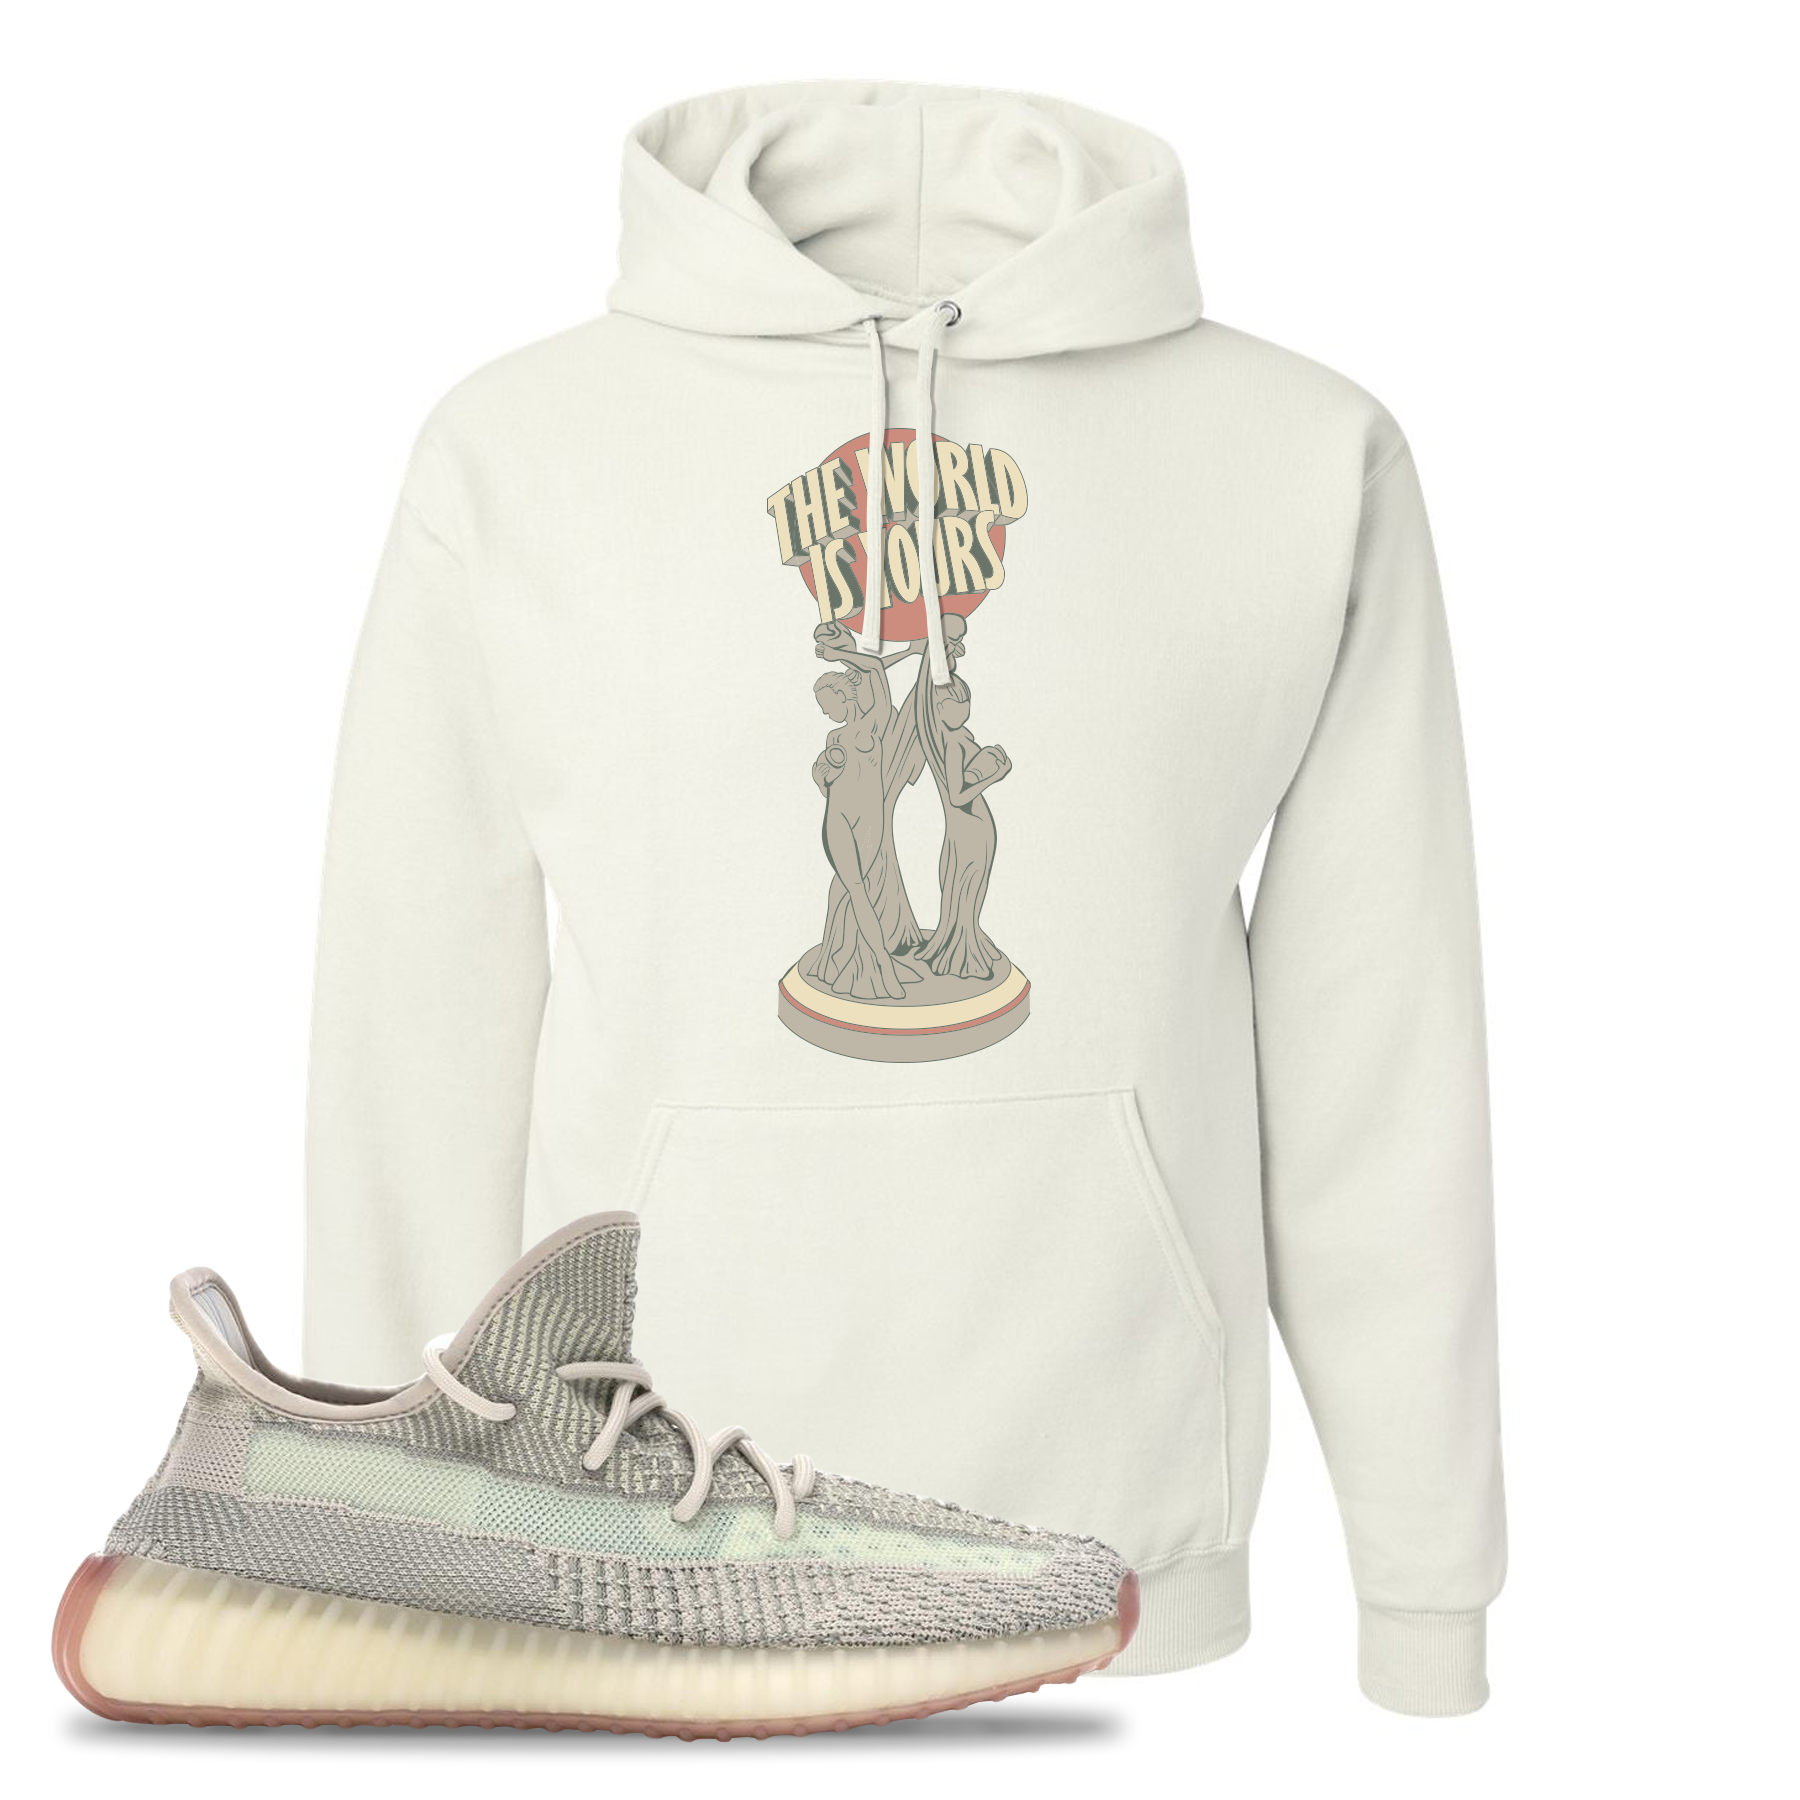 yeezy 350 v2 citrin outfit